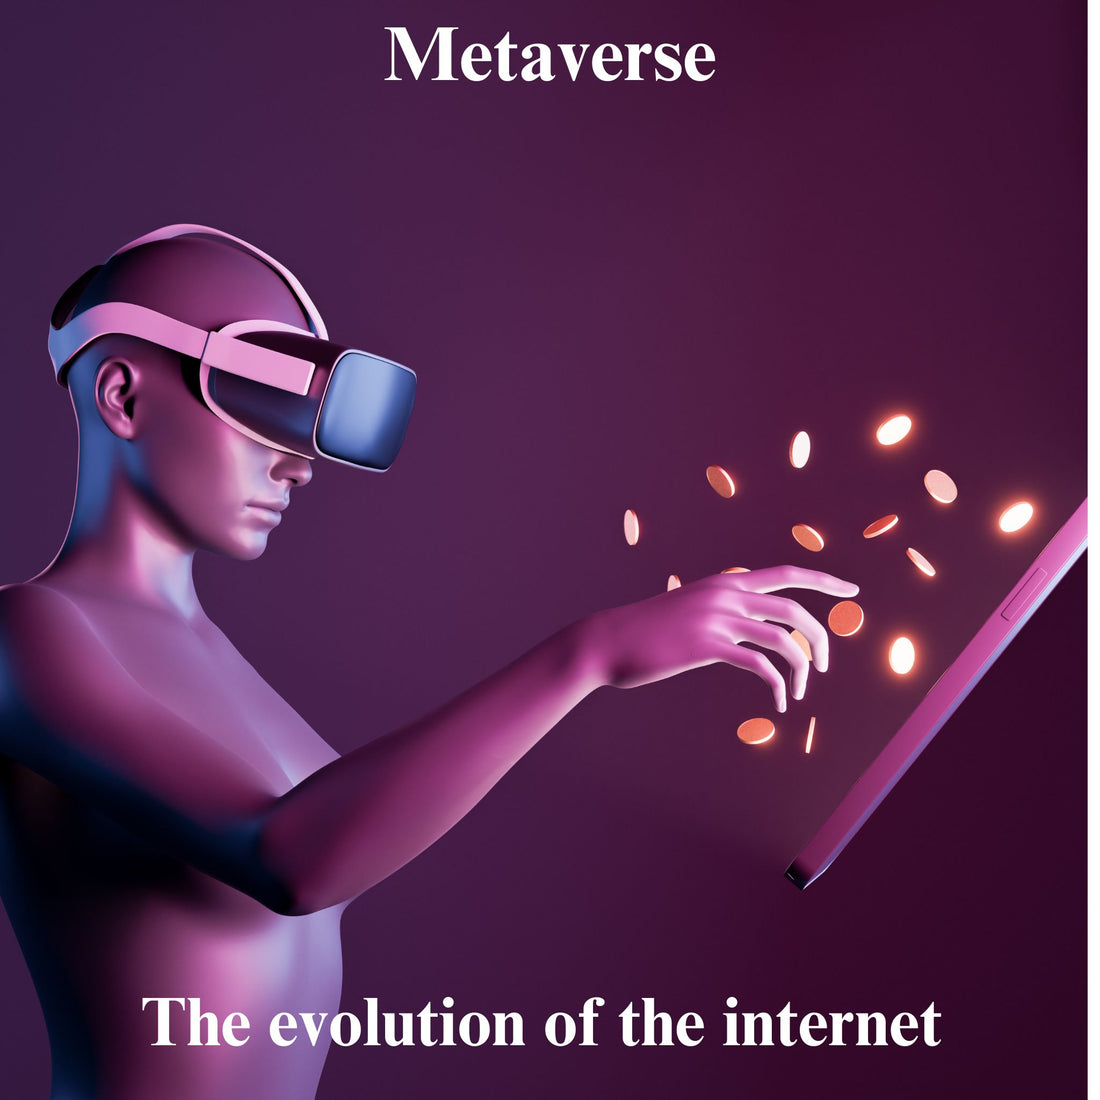 Metaverse is the evolution of the internet